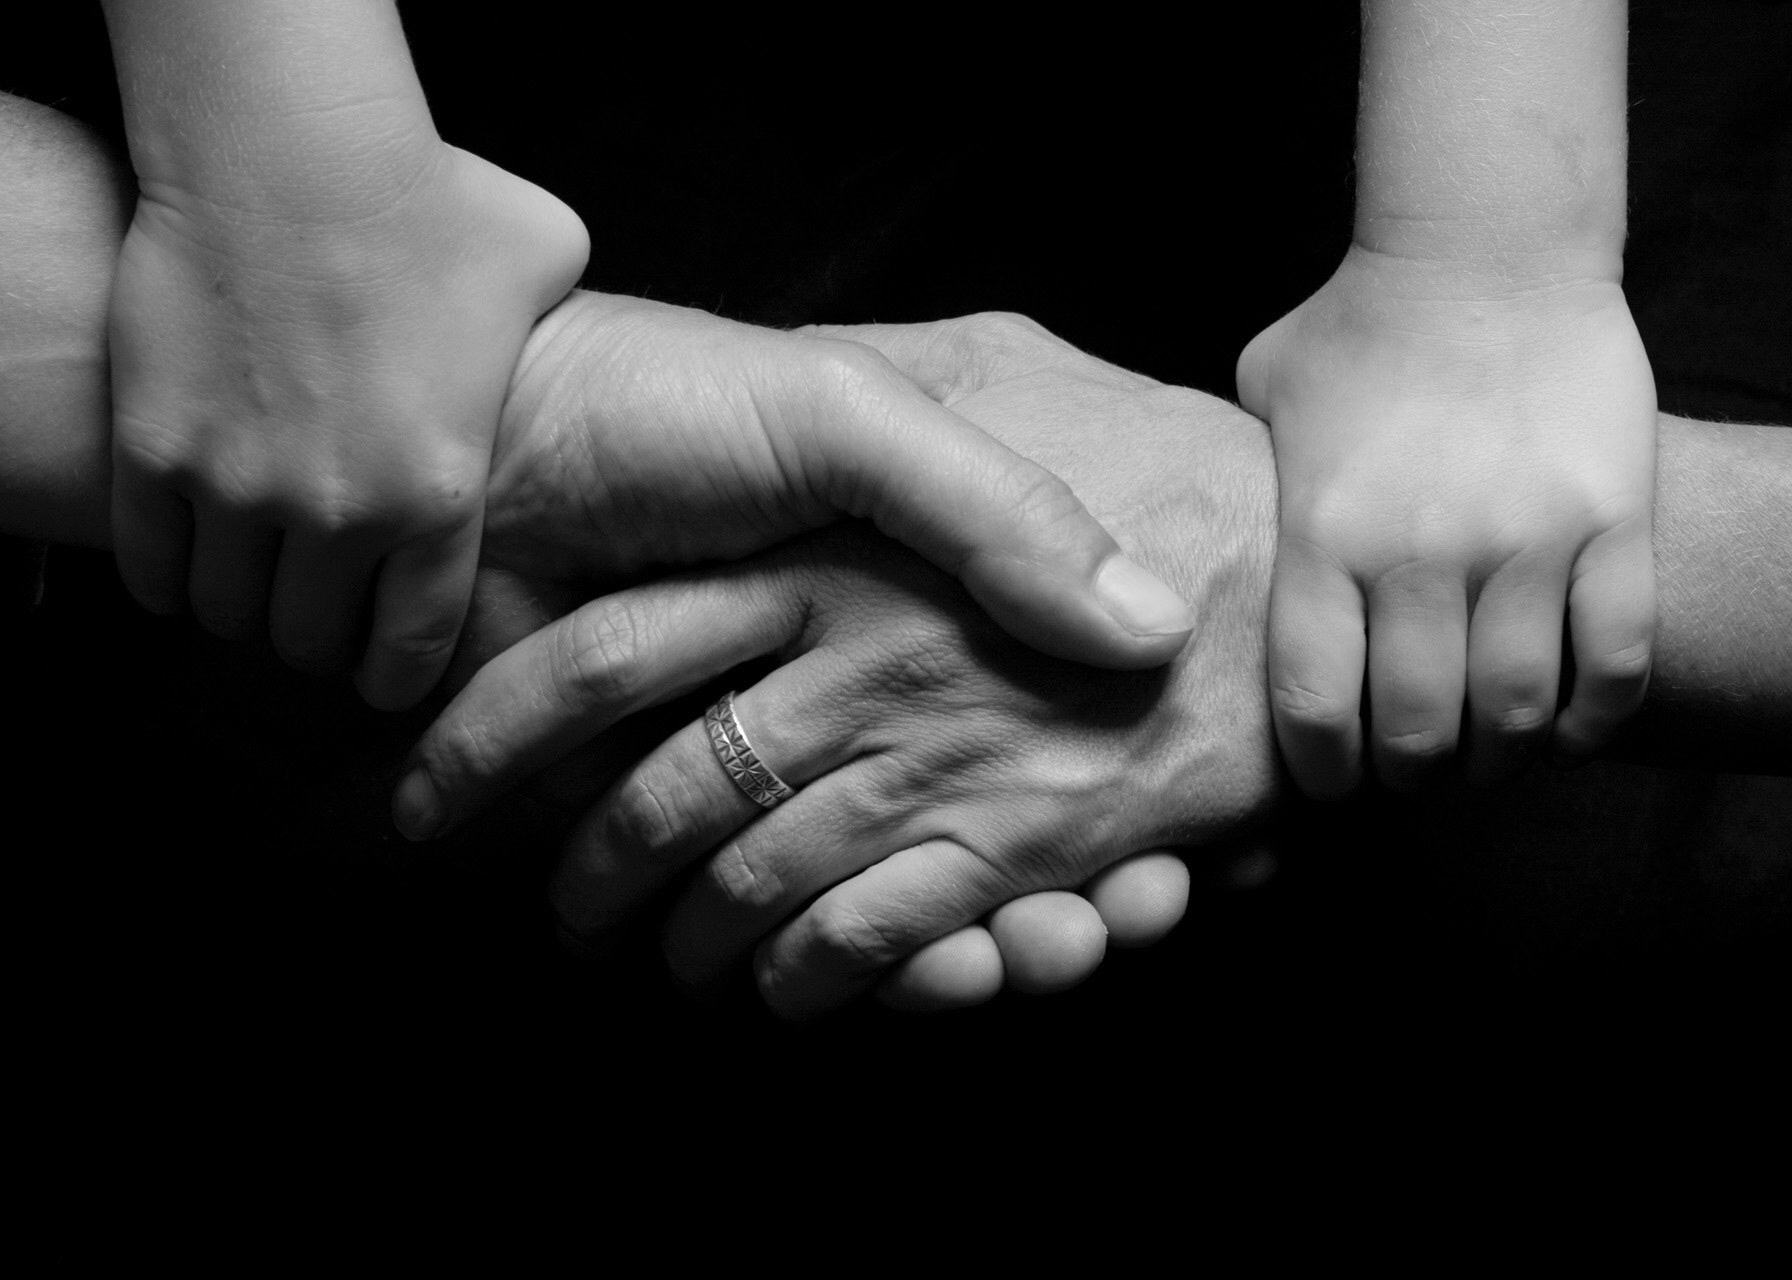 Two hands shaking with child's hand gripping each wrist